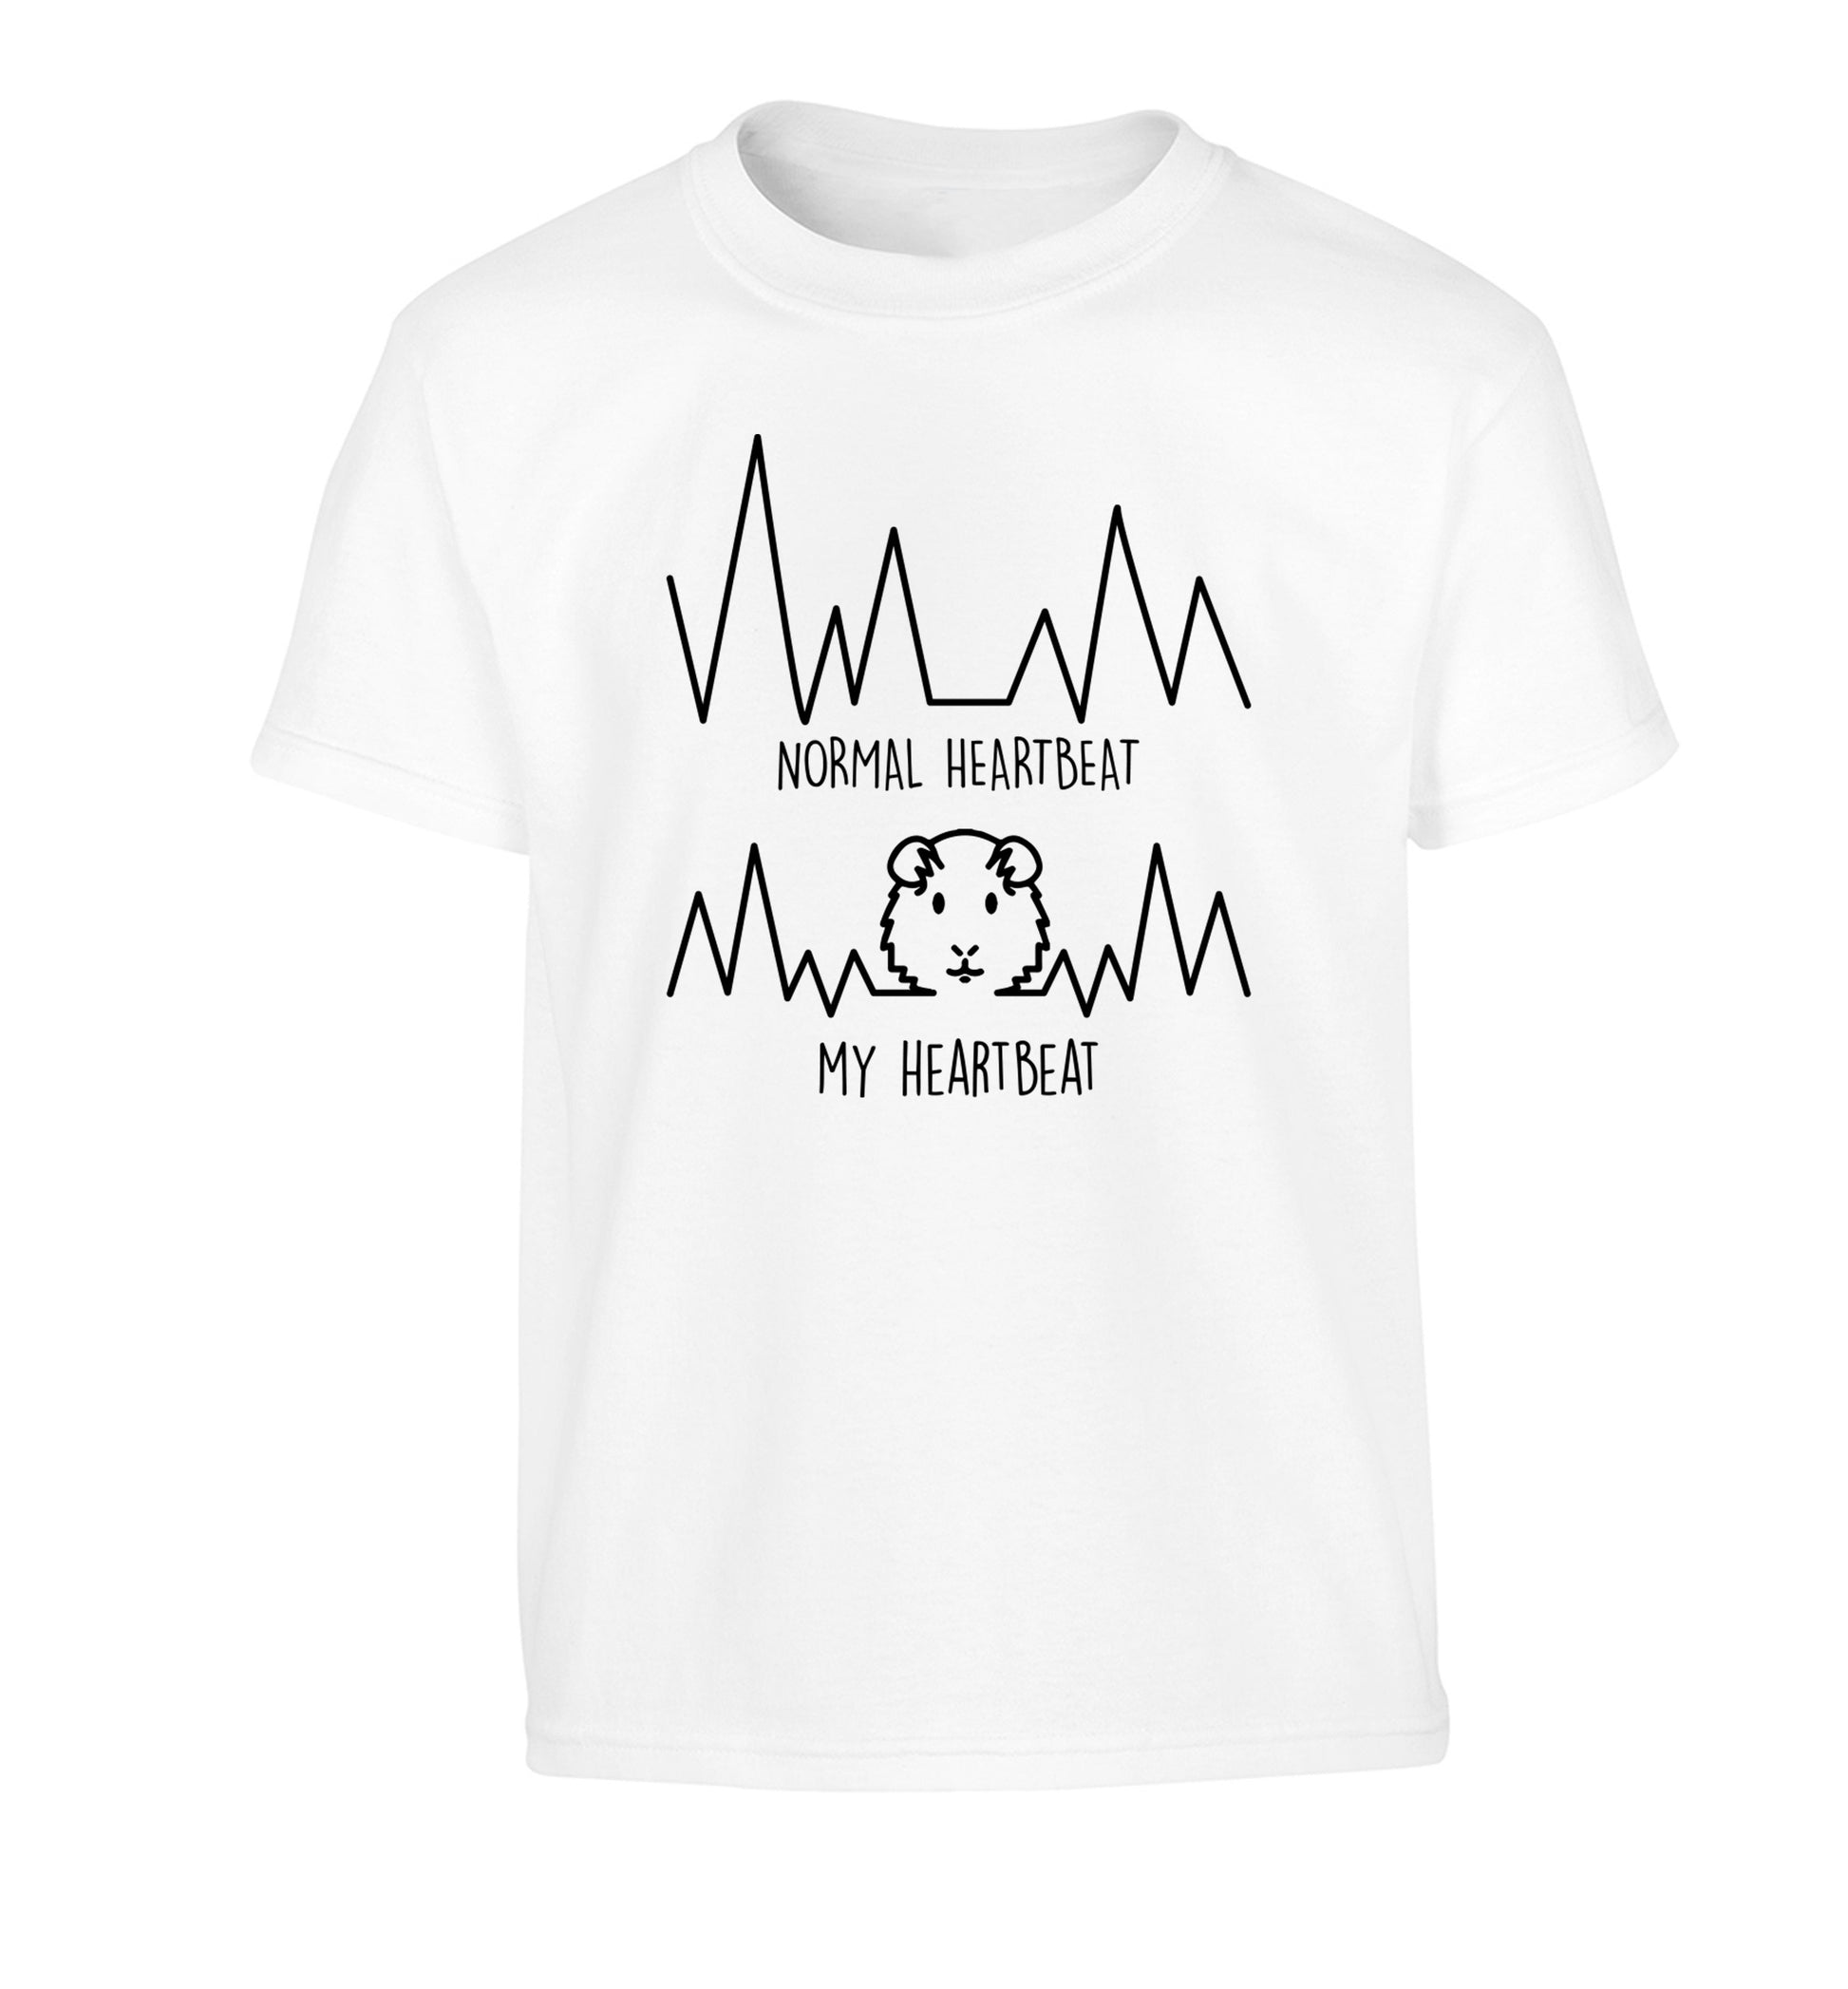 Normal heartbeat vs my heartbeat guinea pig lover Children's white Tshirt 12-14 Years